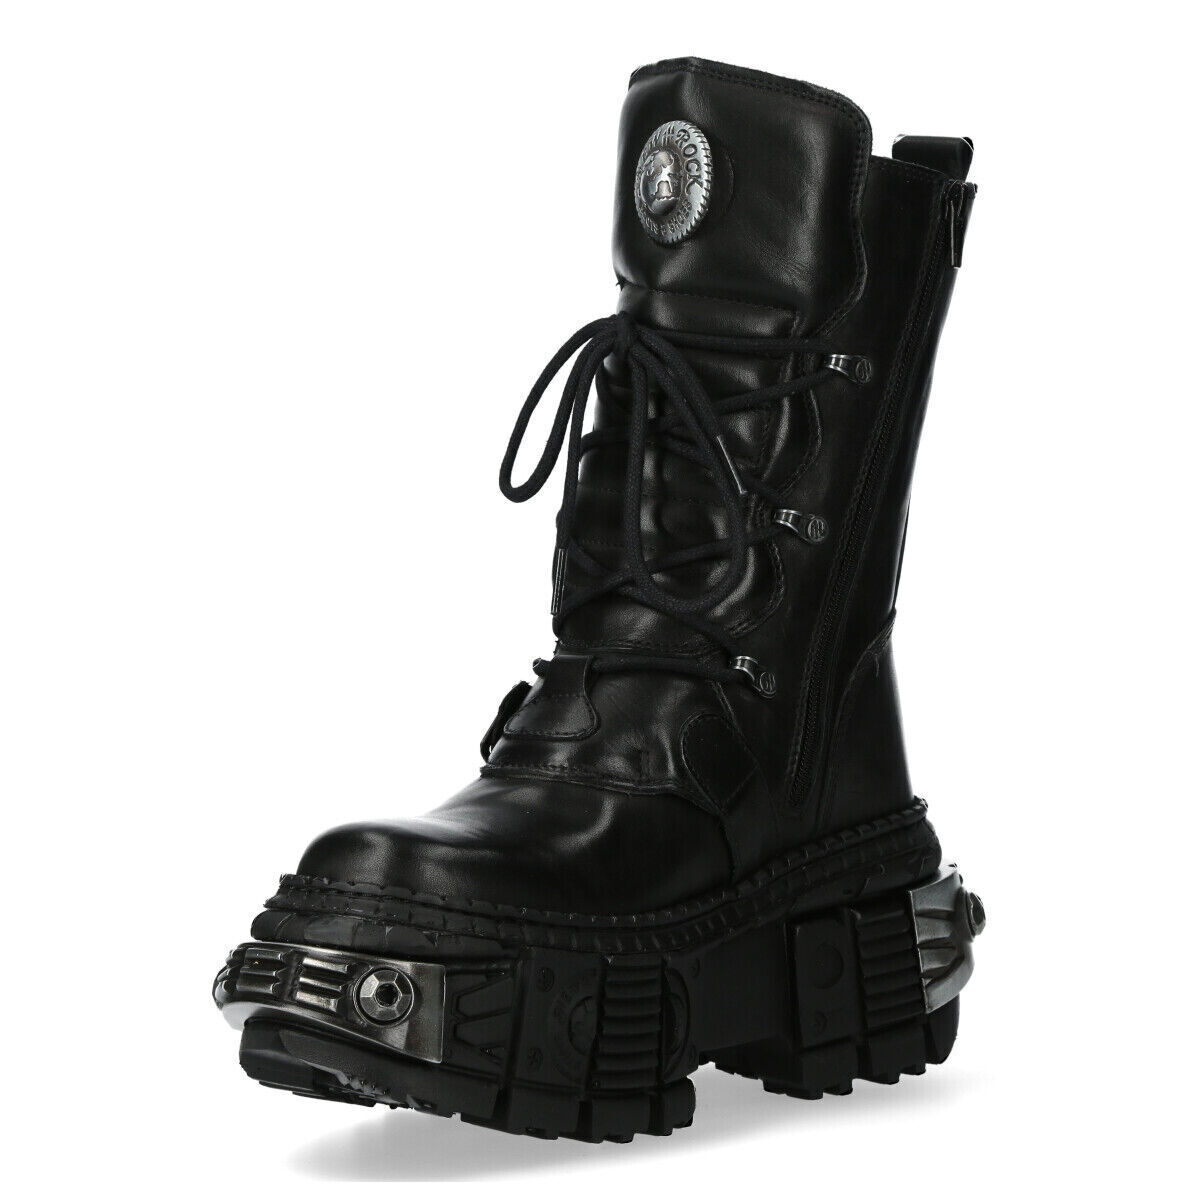 Pre-owned New Rock Rock Boots Wall1473-s11 Unisex Metallic Black Leather Platform Gothic Boots